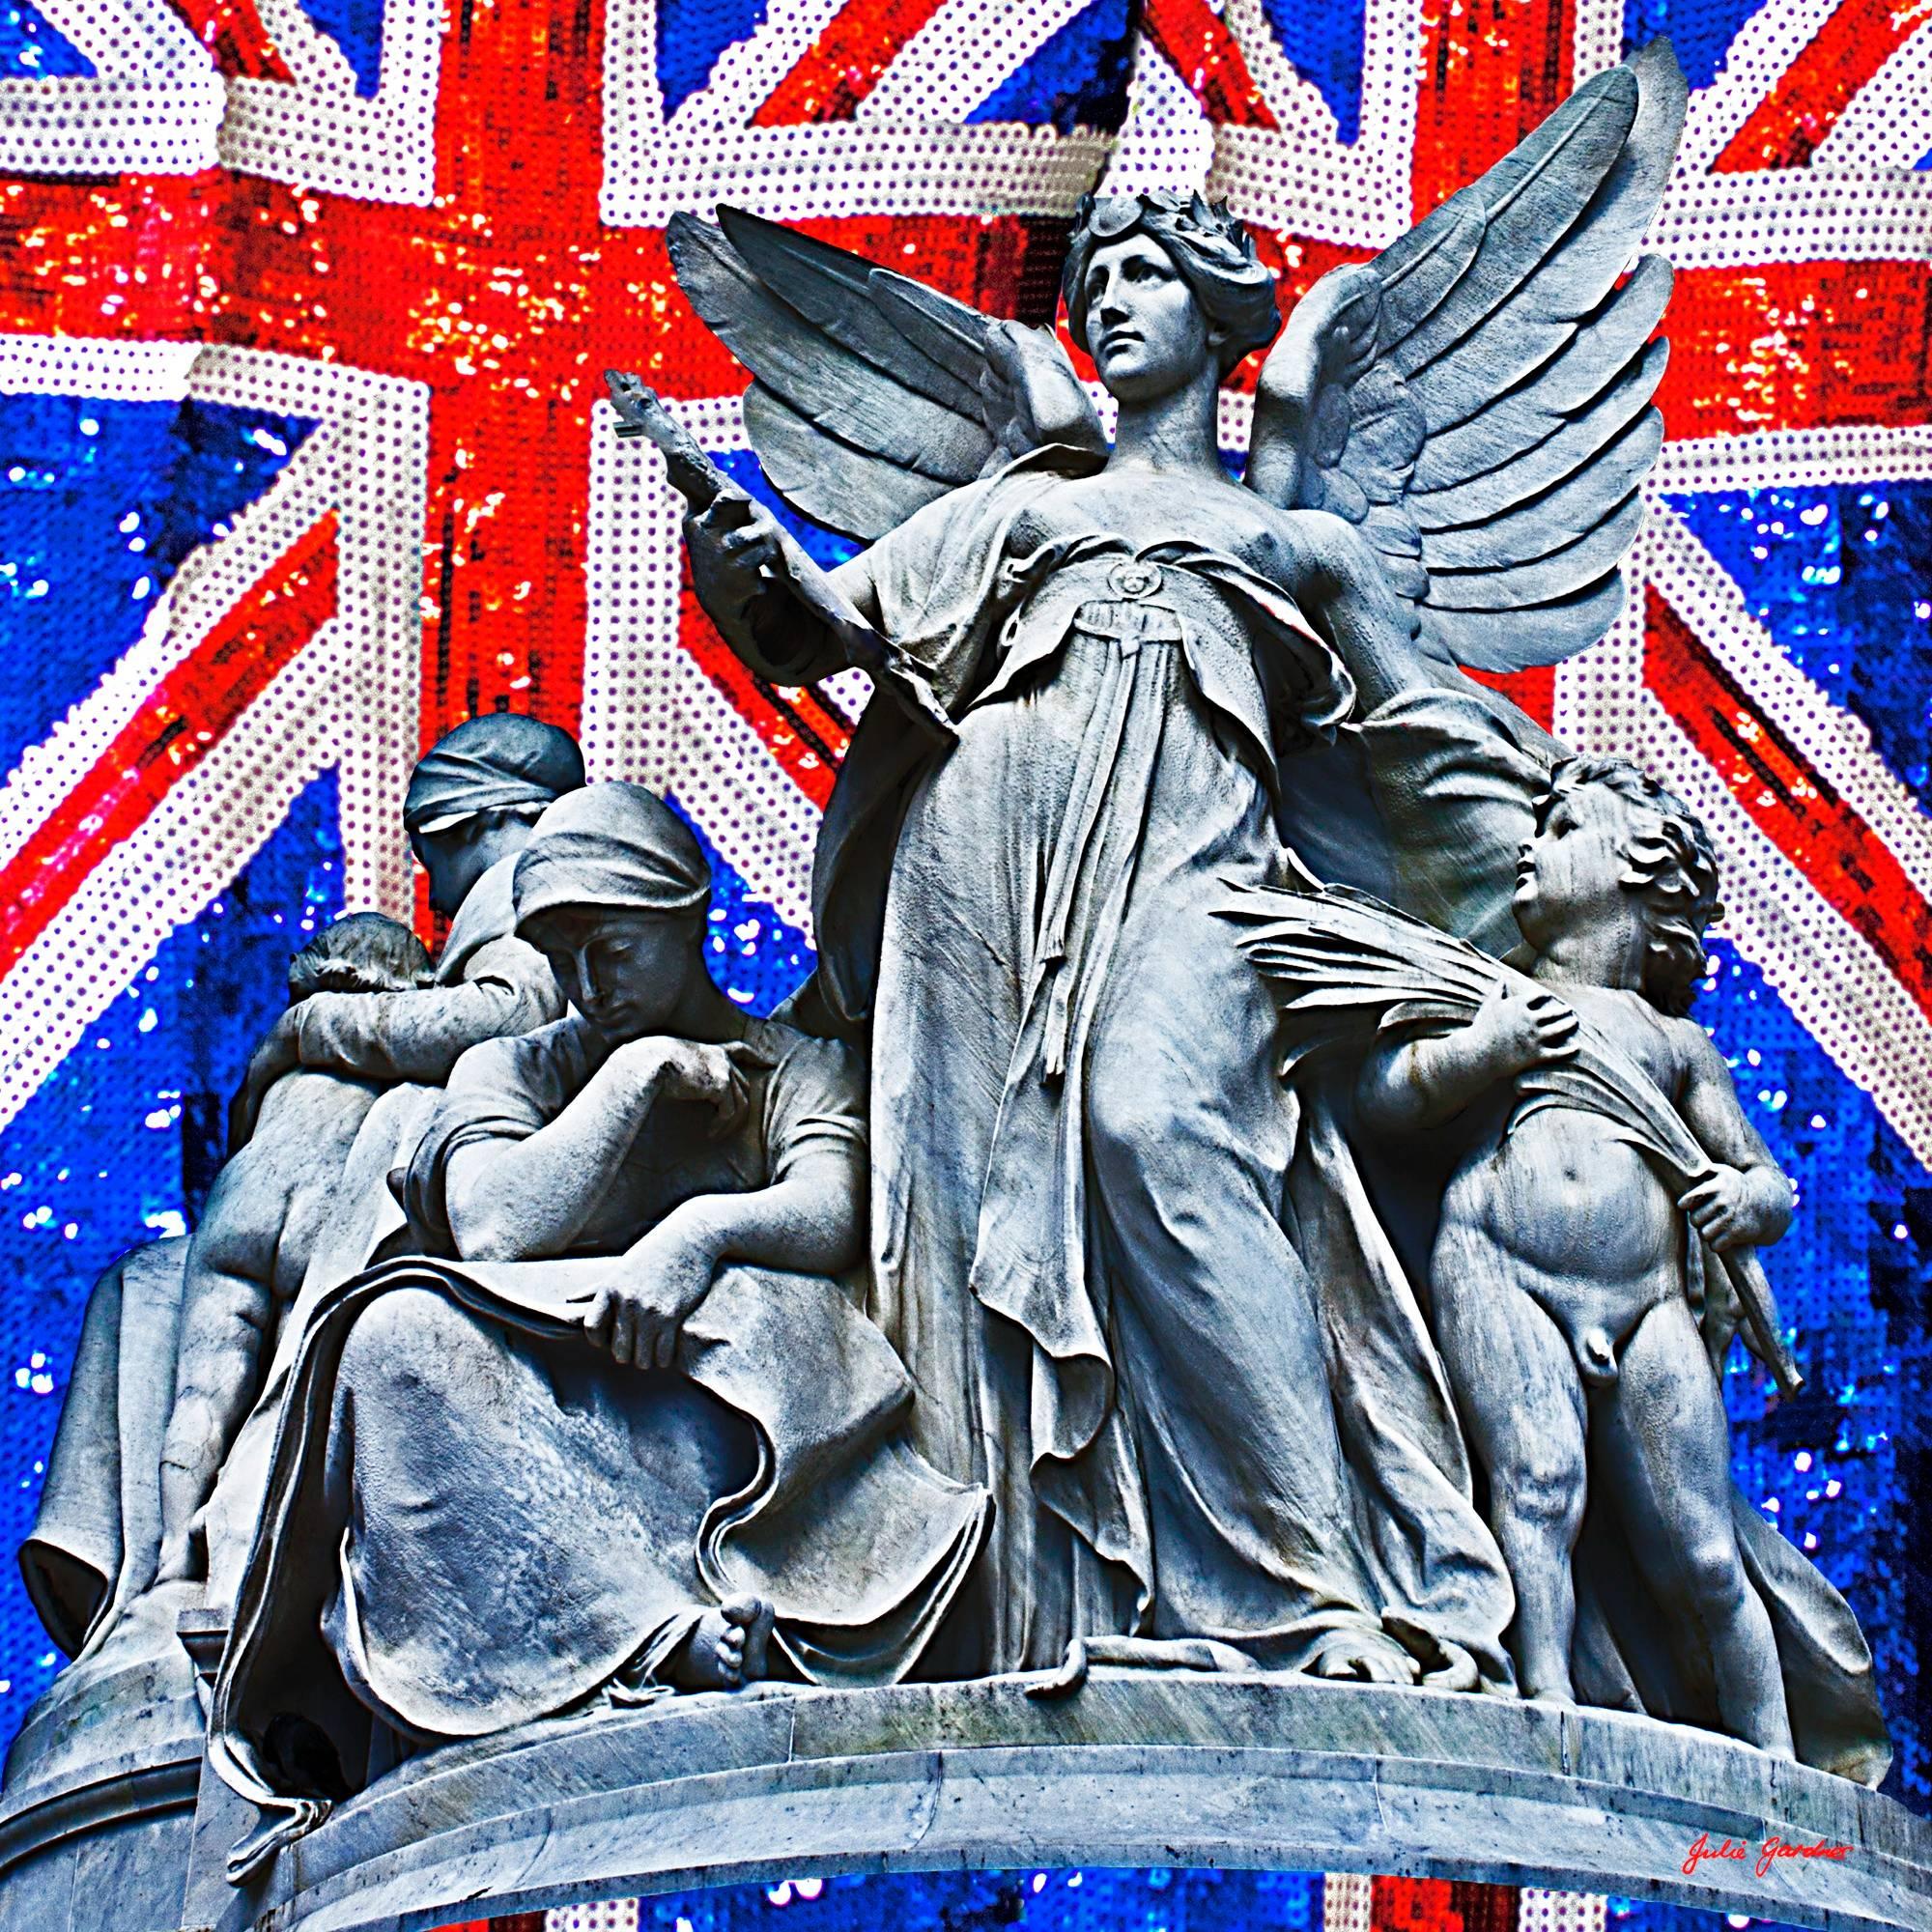 Statue on Union Jack Scarf - Mixed Media Art by Julie Gardner